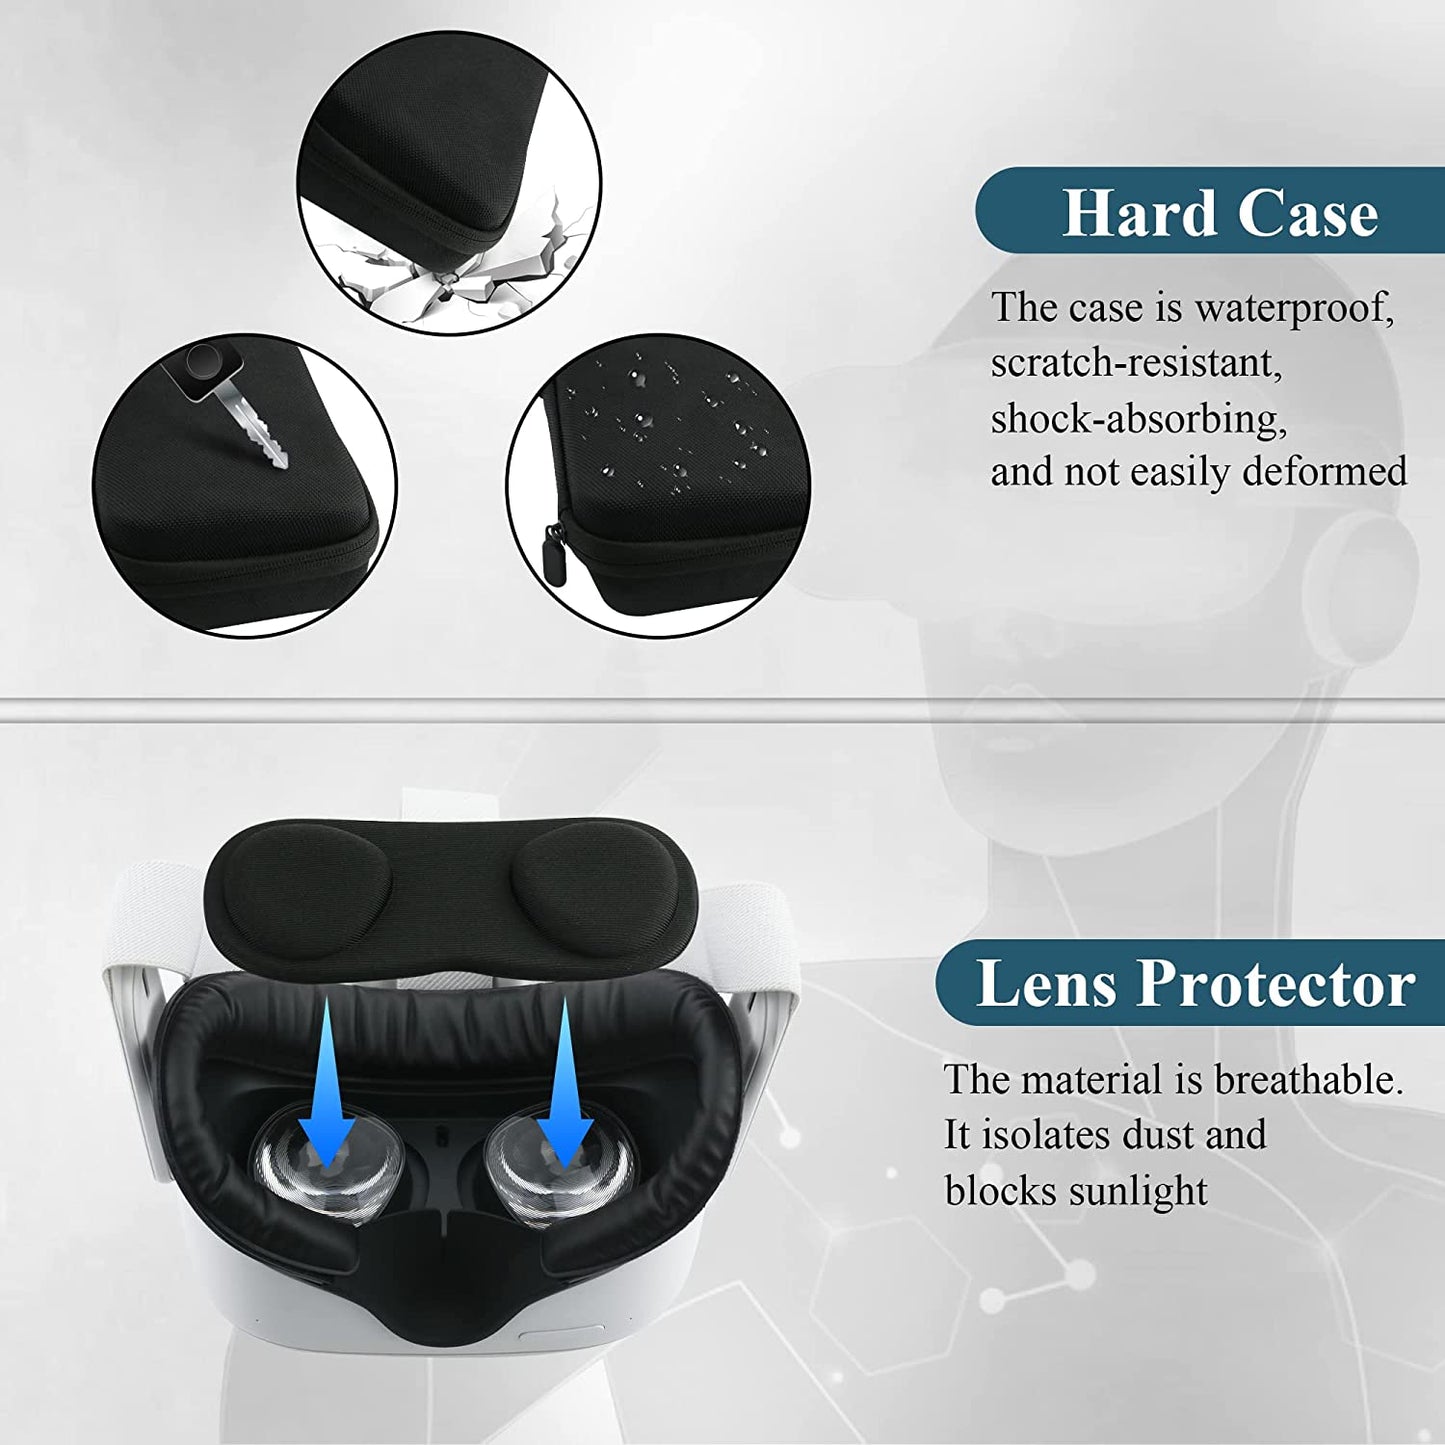 VR Headset Cleaning Accessories Kit, 19 in 1 Lens Cleaning Case Accessories with Lens Protector and Thumb Caps for Meta/Oculus Quest 2/Hololens 2, Various Cleaning Tools for Xbox/Camera/Phone